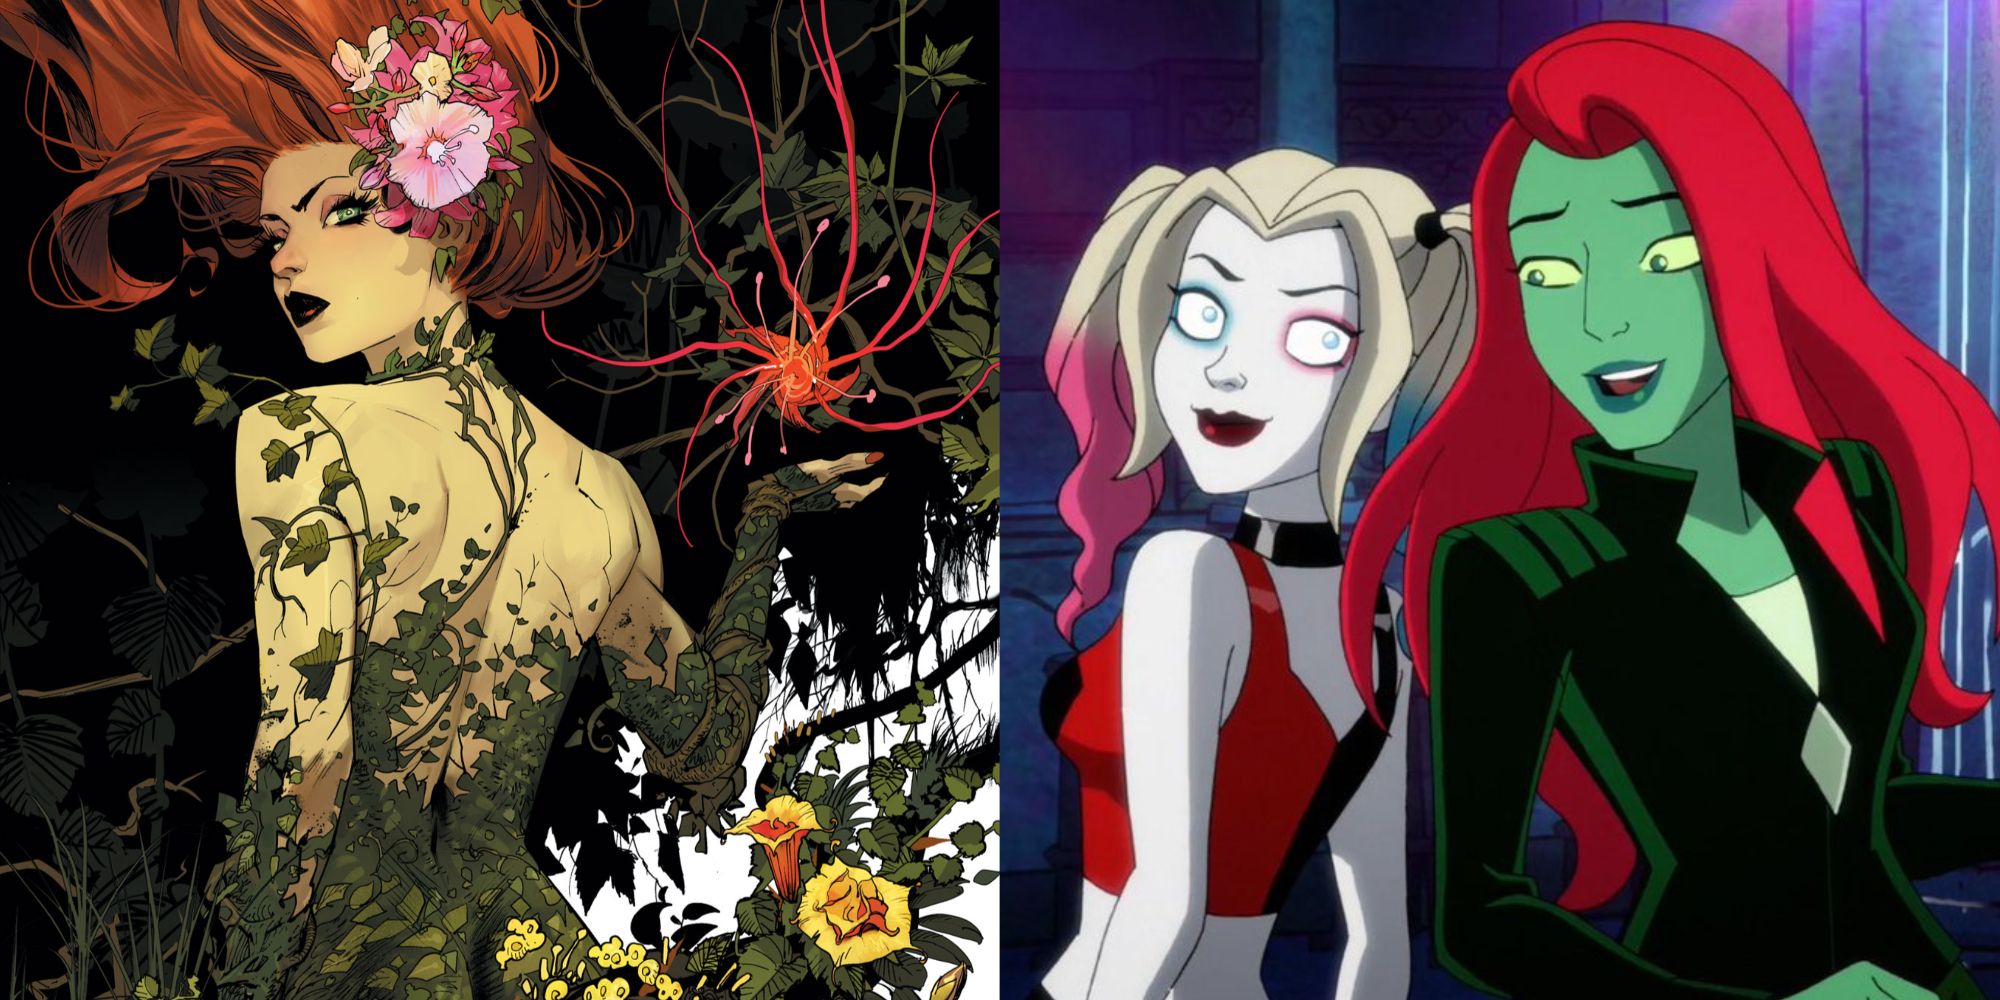 Split image of Poison Ivy from DC Comics and Harley and Ivy from Harley Quinn animated series.